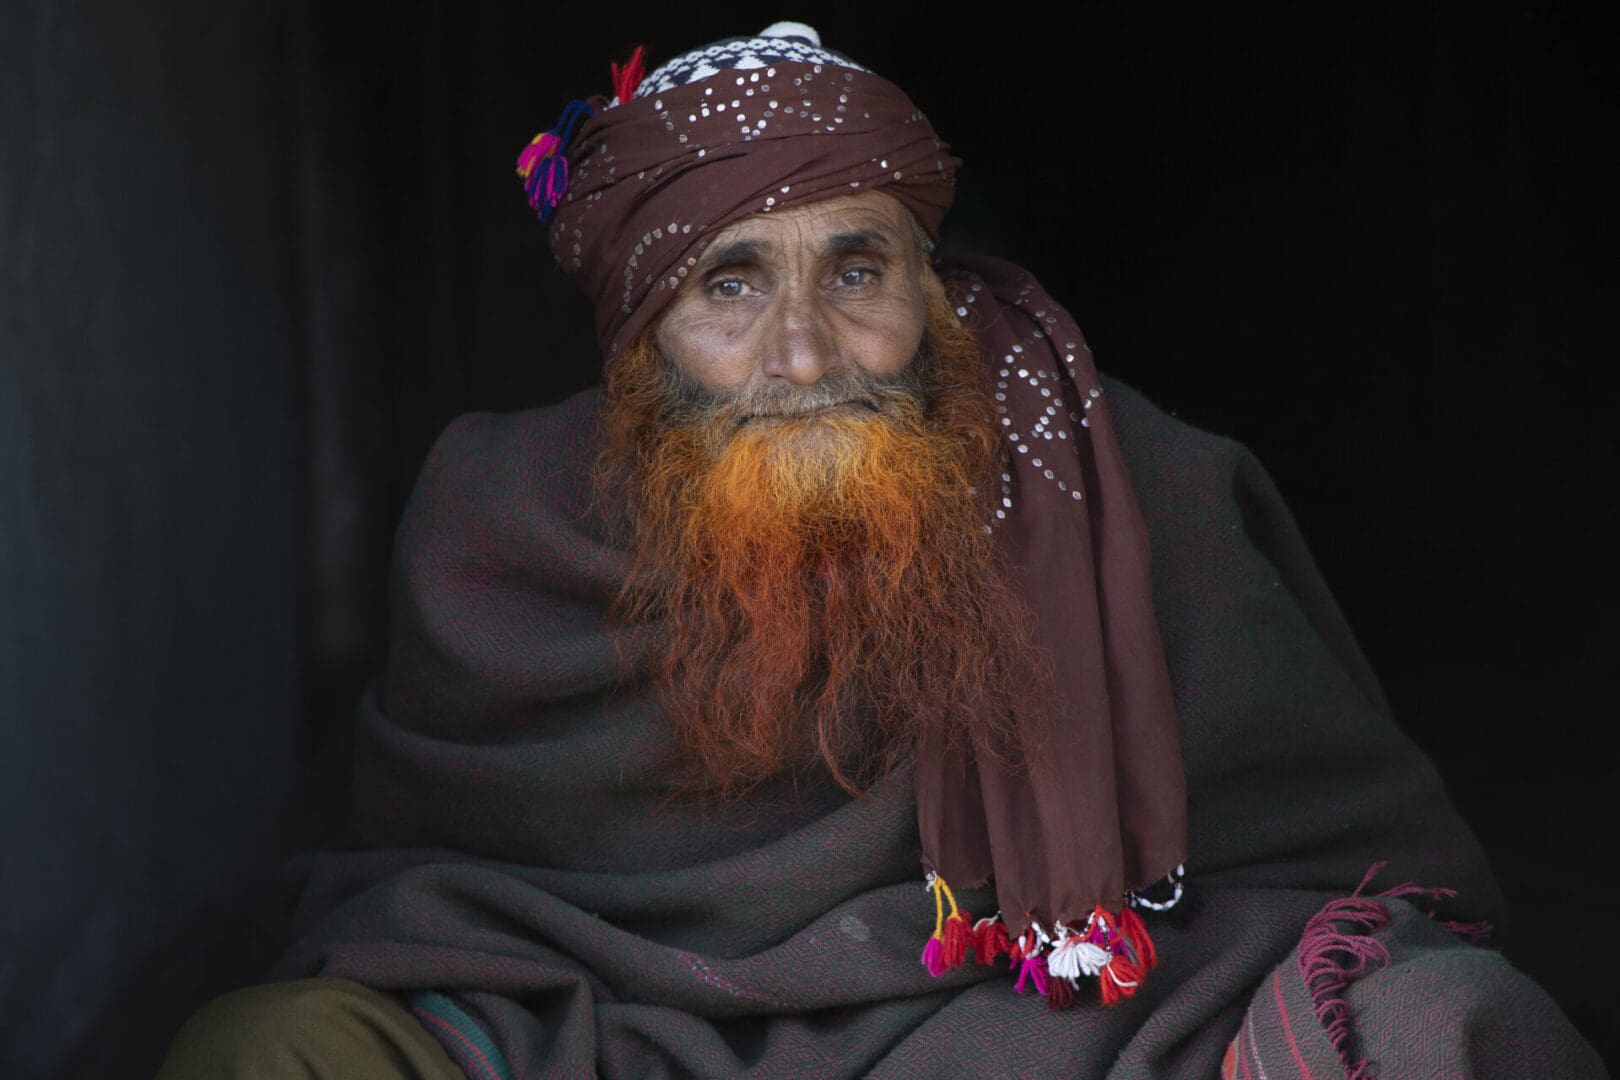 An old man with a red beard sitting in a dark room.